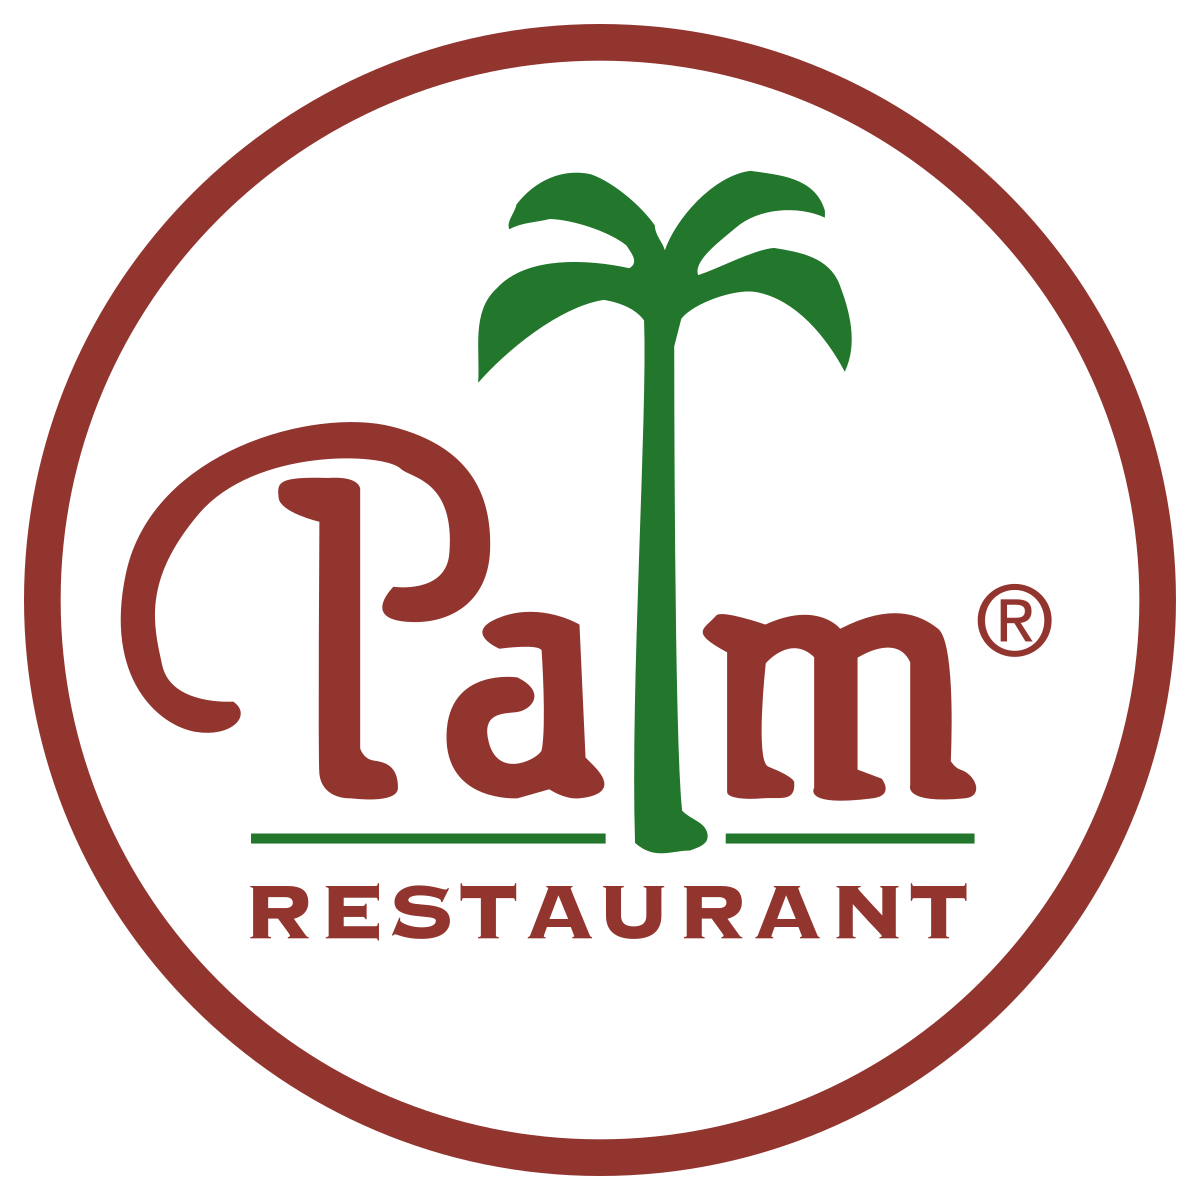 https://upload.wikimedia.org/wikipedia/en/thumb/d/dd/The_Palm_Restaurant.svg/1200px-The_Palm_Restaurant.svg.png